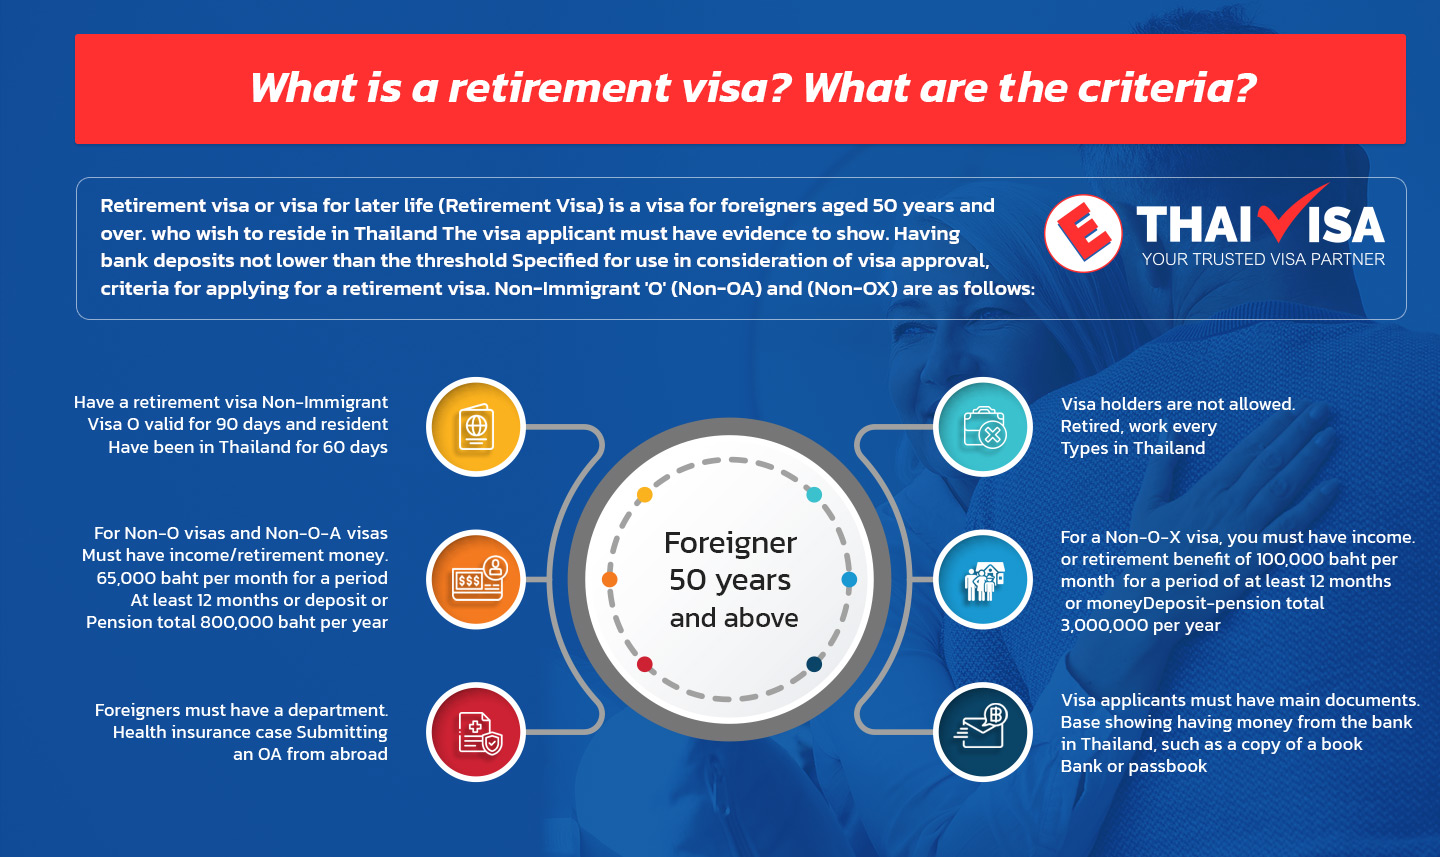 What is a retirement visa?